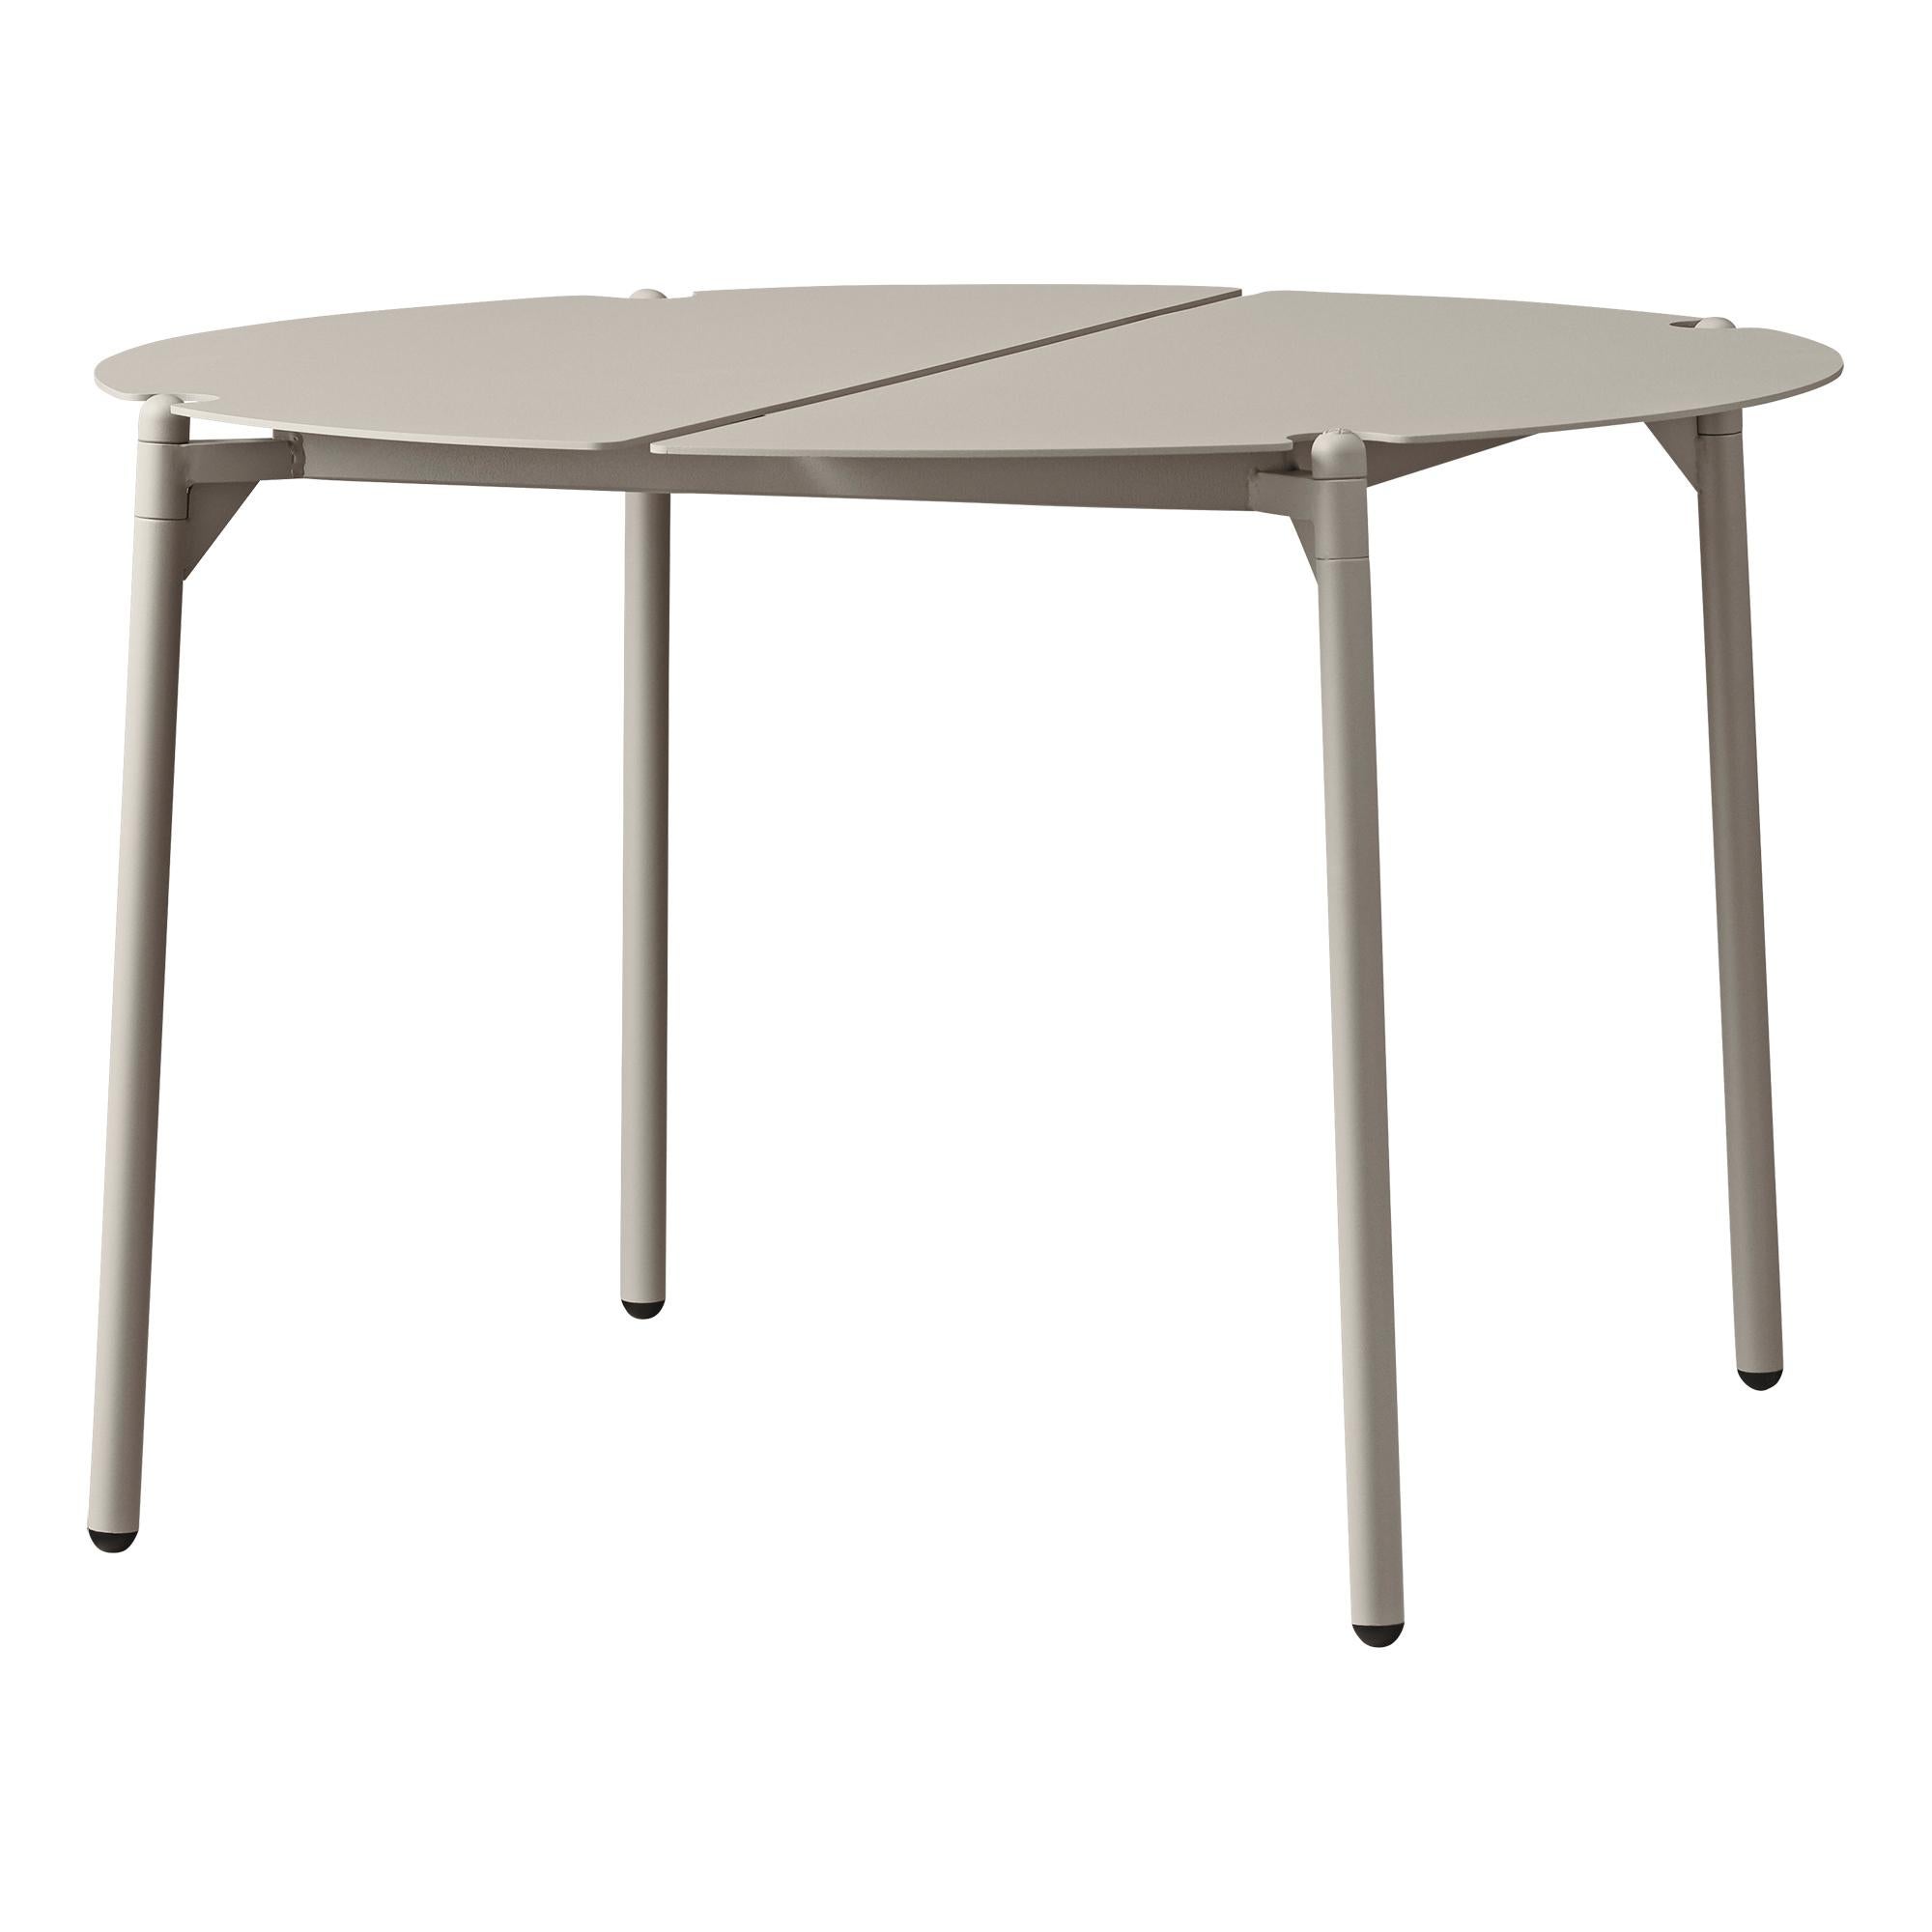 Large taupe minimalist lounge table
Dimensions: Diameter 70 x H 45 cm 
Materials: Steel w. Matte Powder Coating & Aluminum w. Matte Powder Coating.
Available in colors: Taupe, Bordeaux, Forest, Ginger Bread, Black and, Black and Gold. 

Place